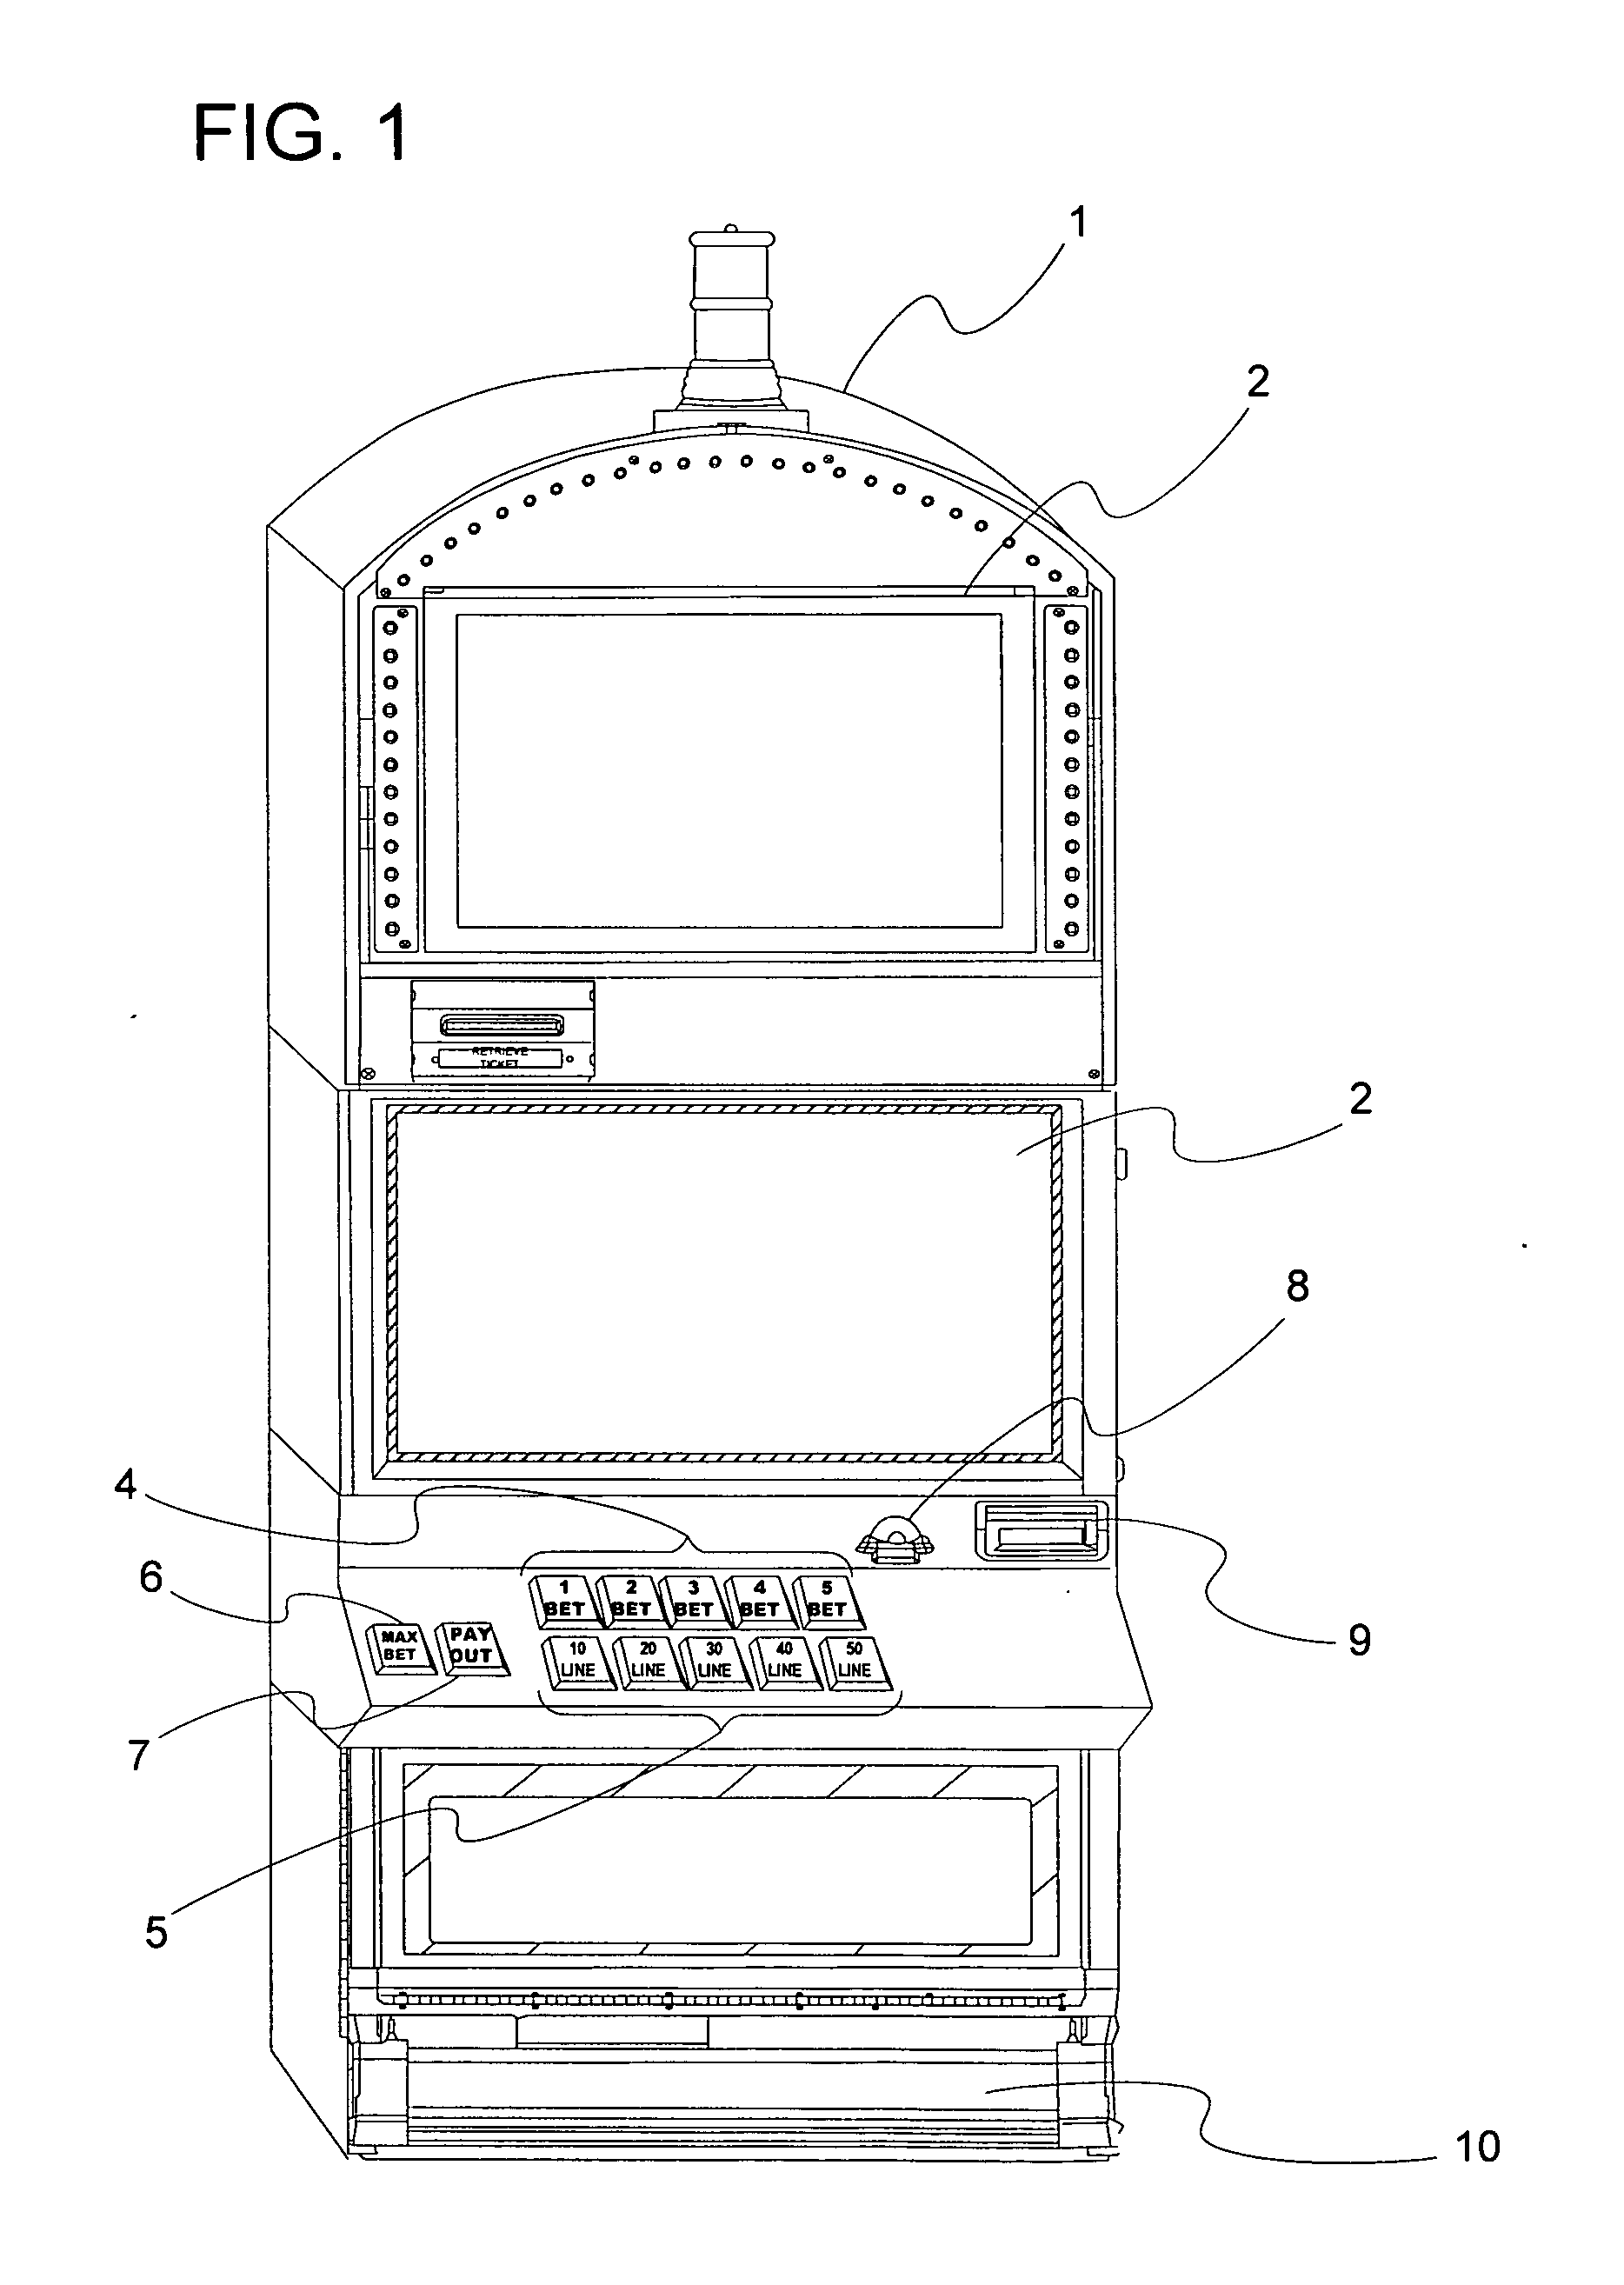 Gaming machine with extensive symbols